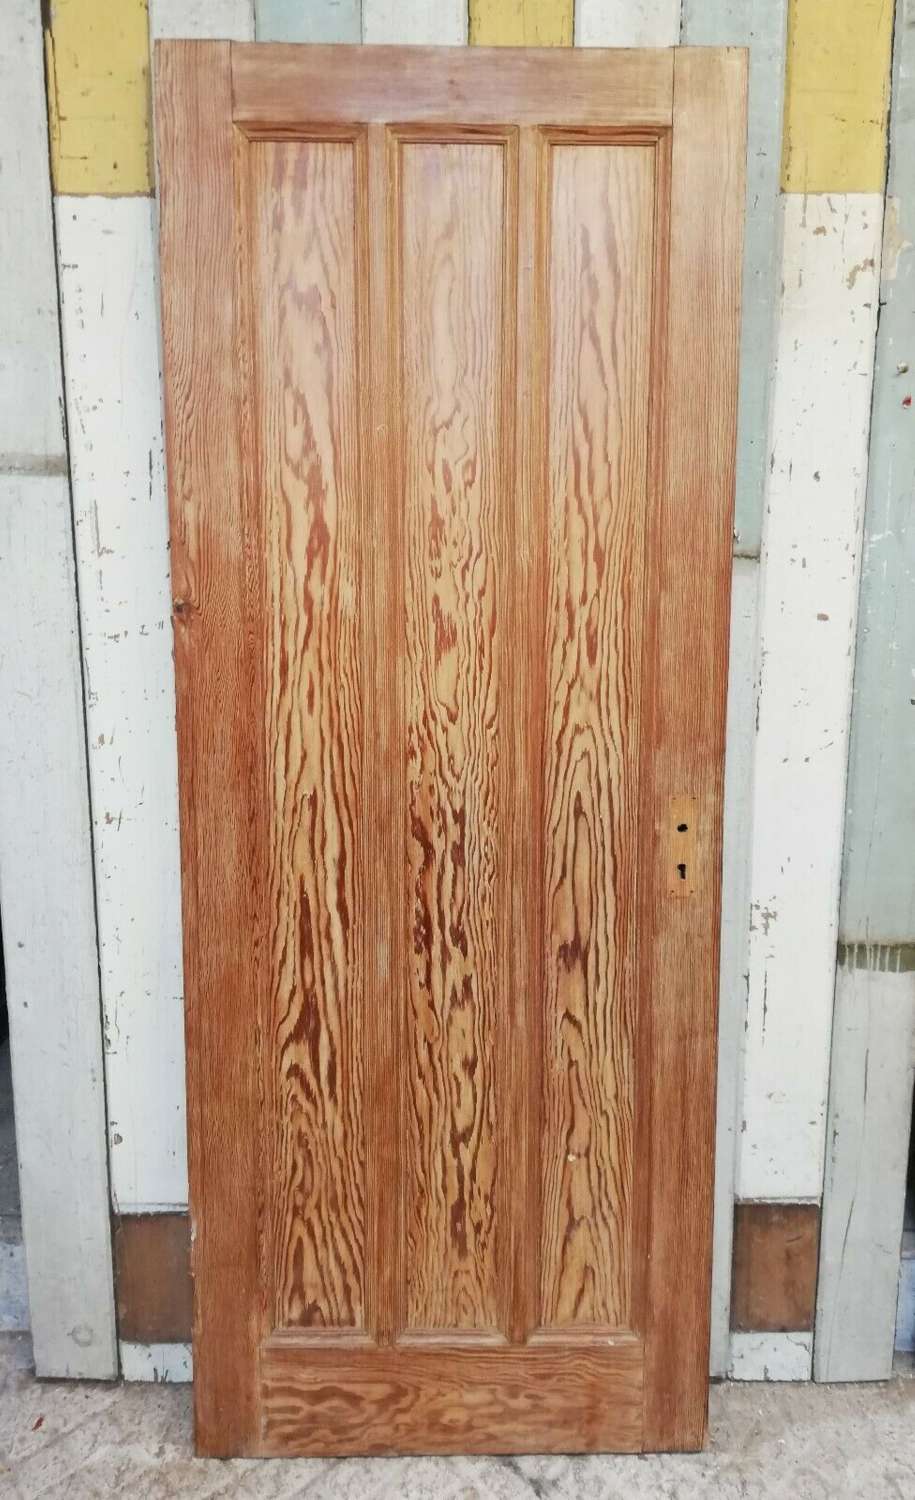 DI0700 A RECLAIMED PITCH PINE ARTS AND CRAFTS INTERNAL DOOR